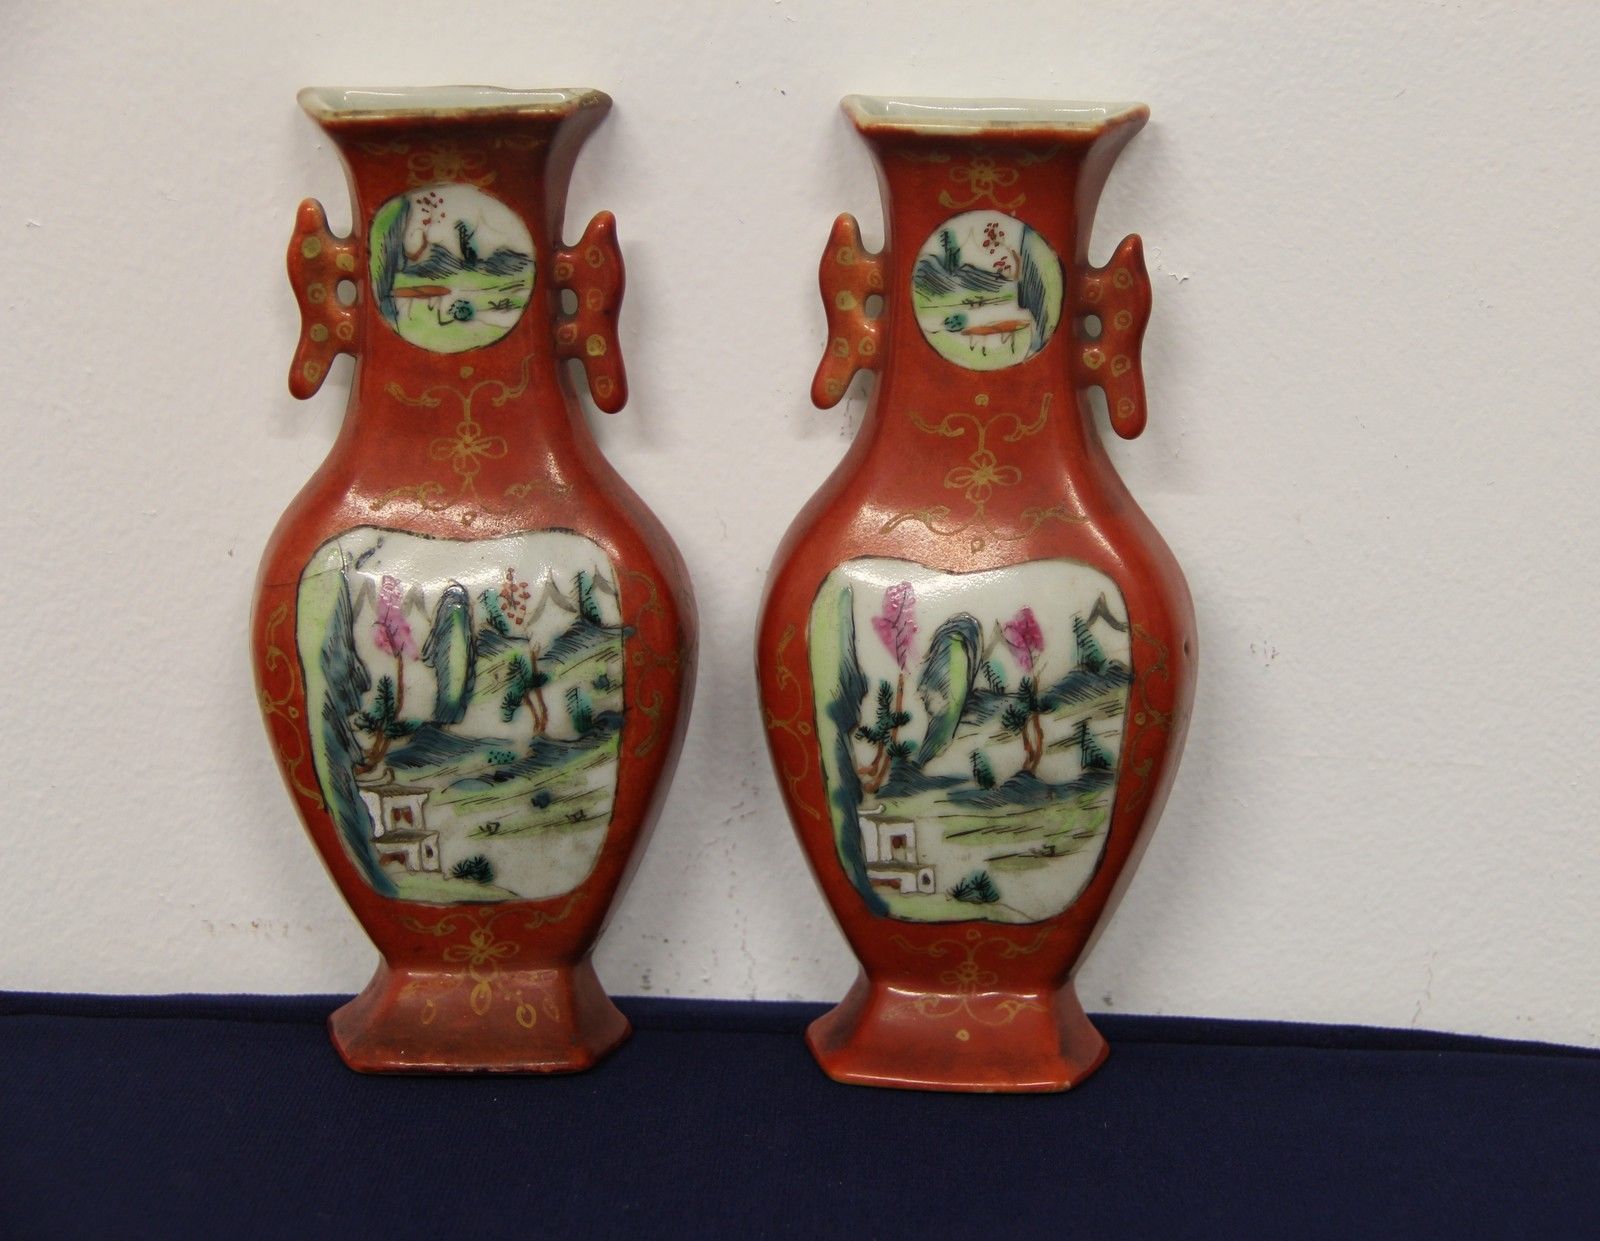 Rare Pair of Antique Chinese Porcelain Vases with Gorgeous Details